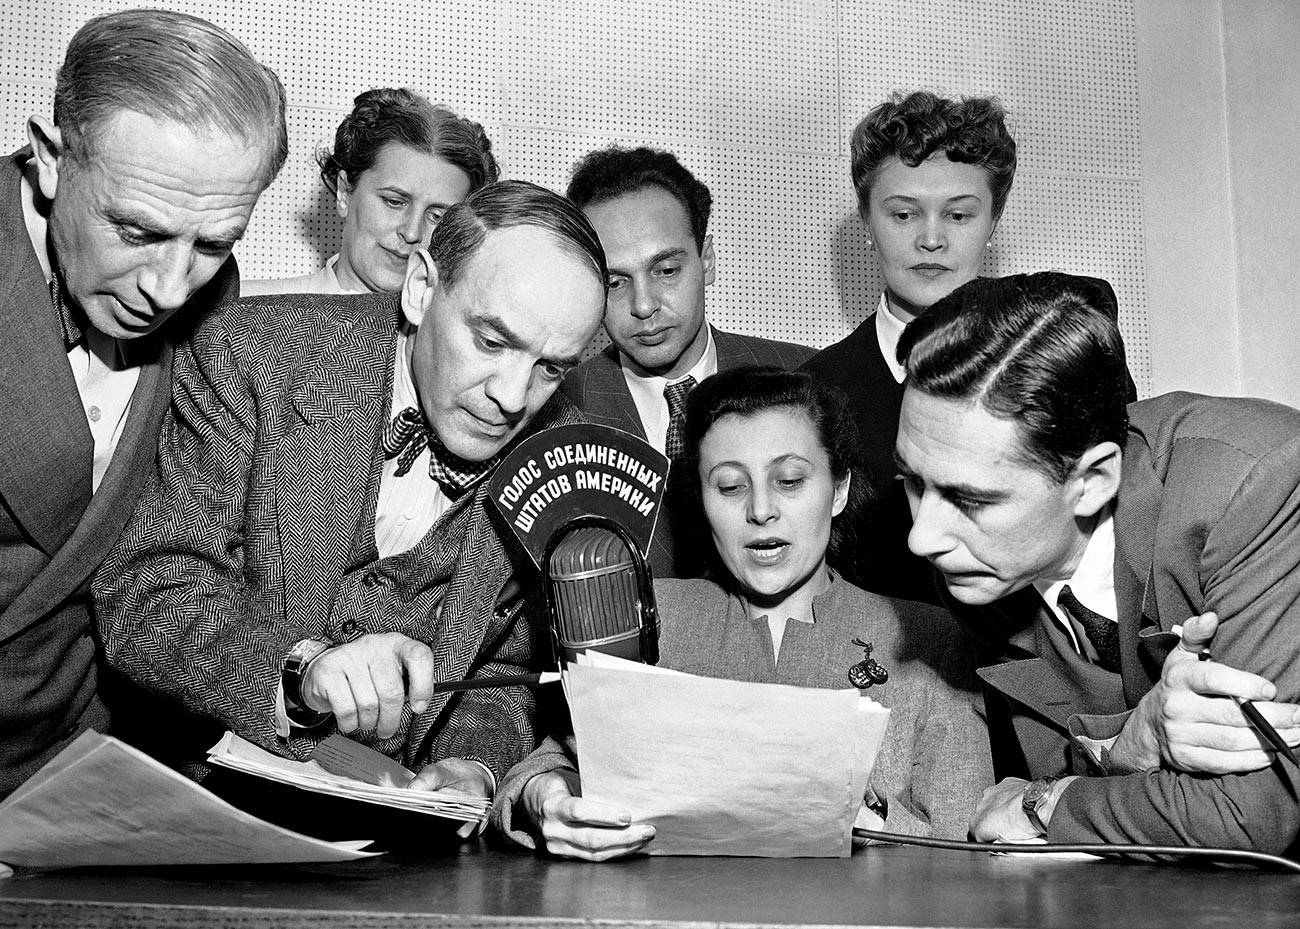  A group of State Department announcers huddle around the microphone after the initial shortwave broadcast in Russian to Russia from New York City on Feb. 17, 1947.